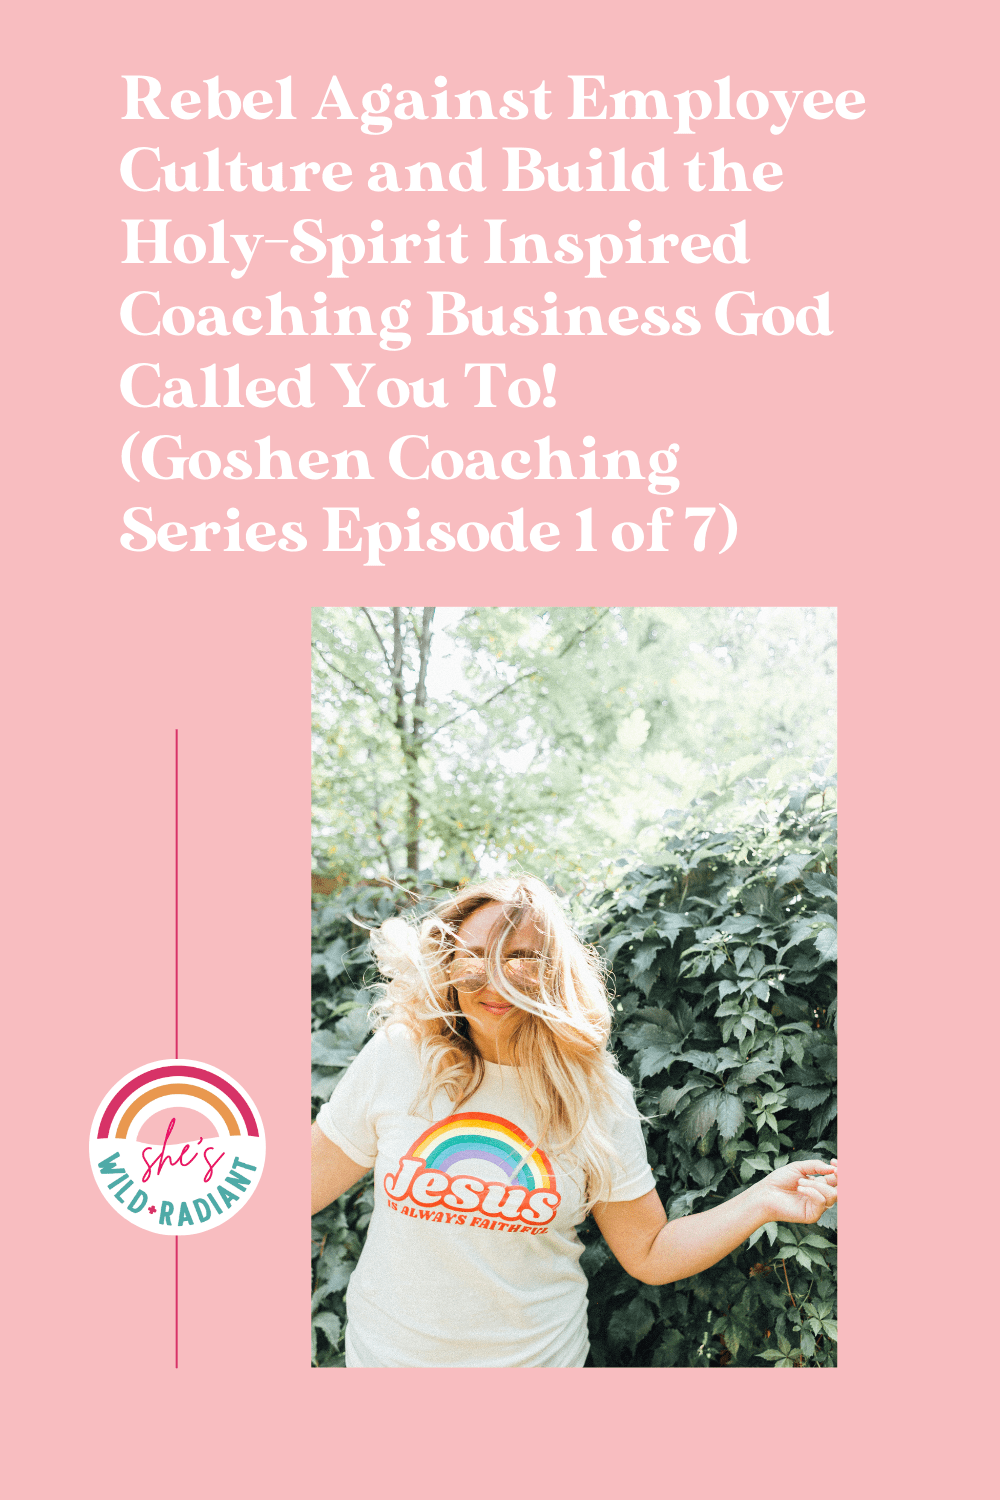 Christian Business Coach, Scale Your Business, Grow an Online Business, Christian Business Podcast, Business Strategy, Faith and Business, Build Your Business, Your Goshen,